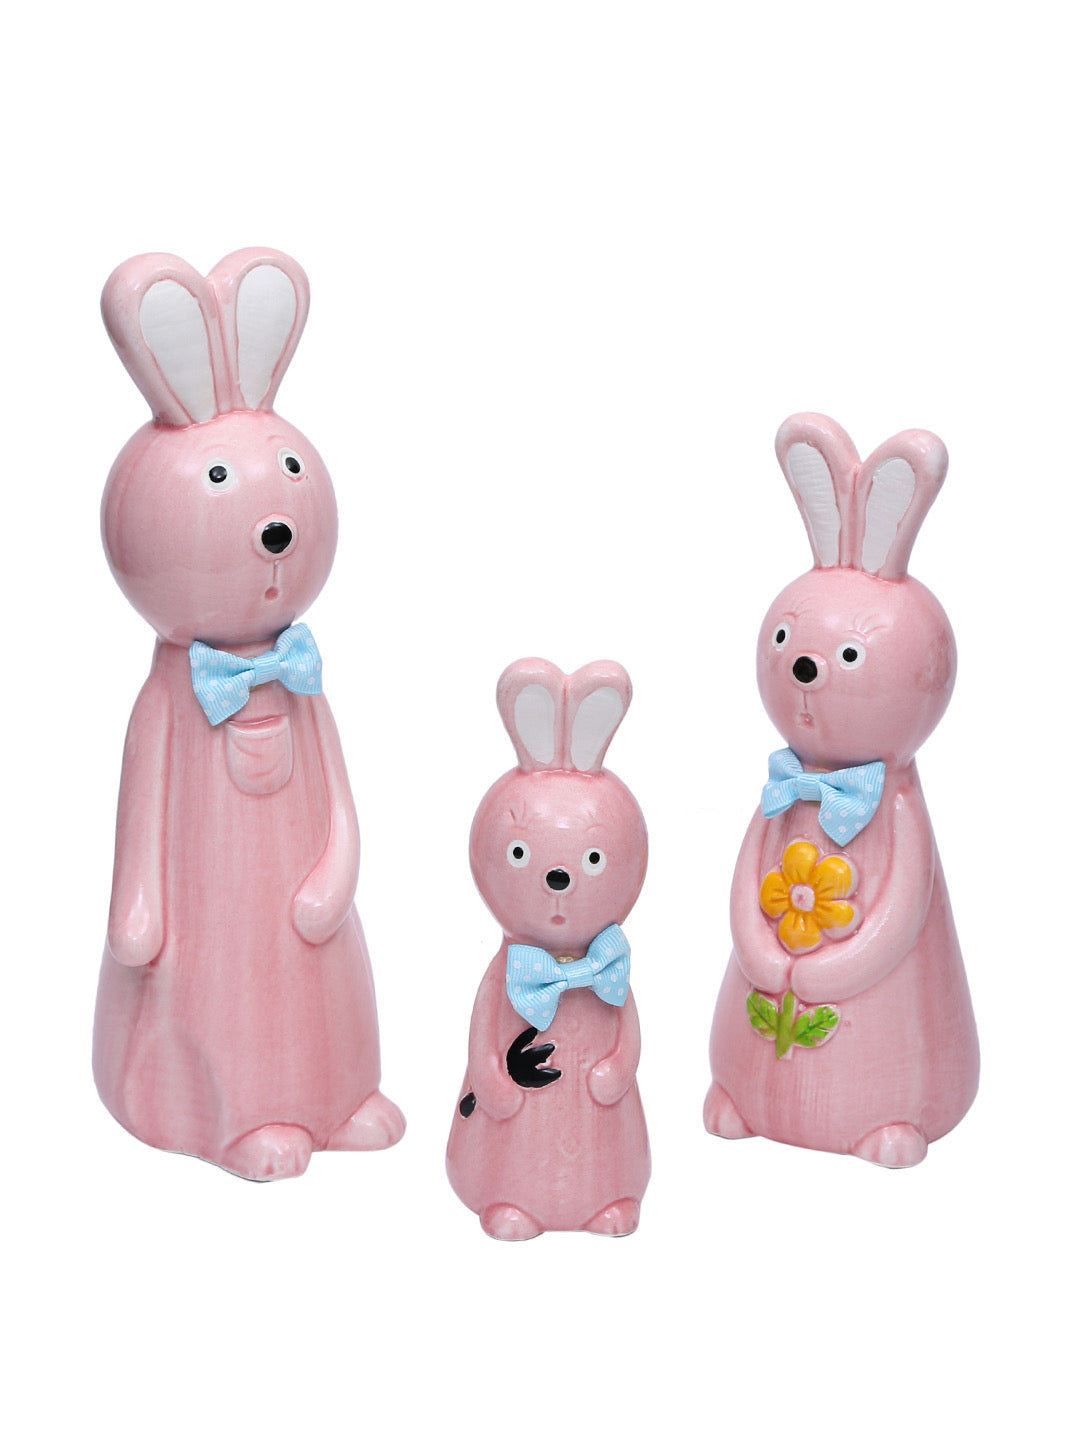 Pretty and Delightful Pink Ceramic Rabbit Family - Default Title (SHOW19563)